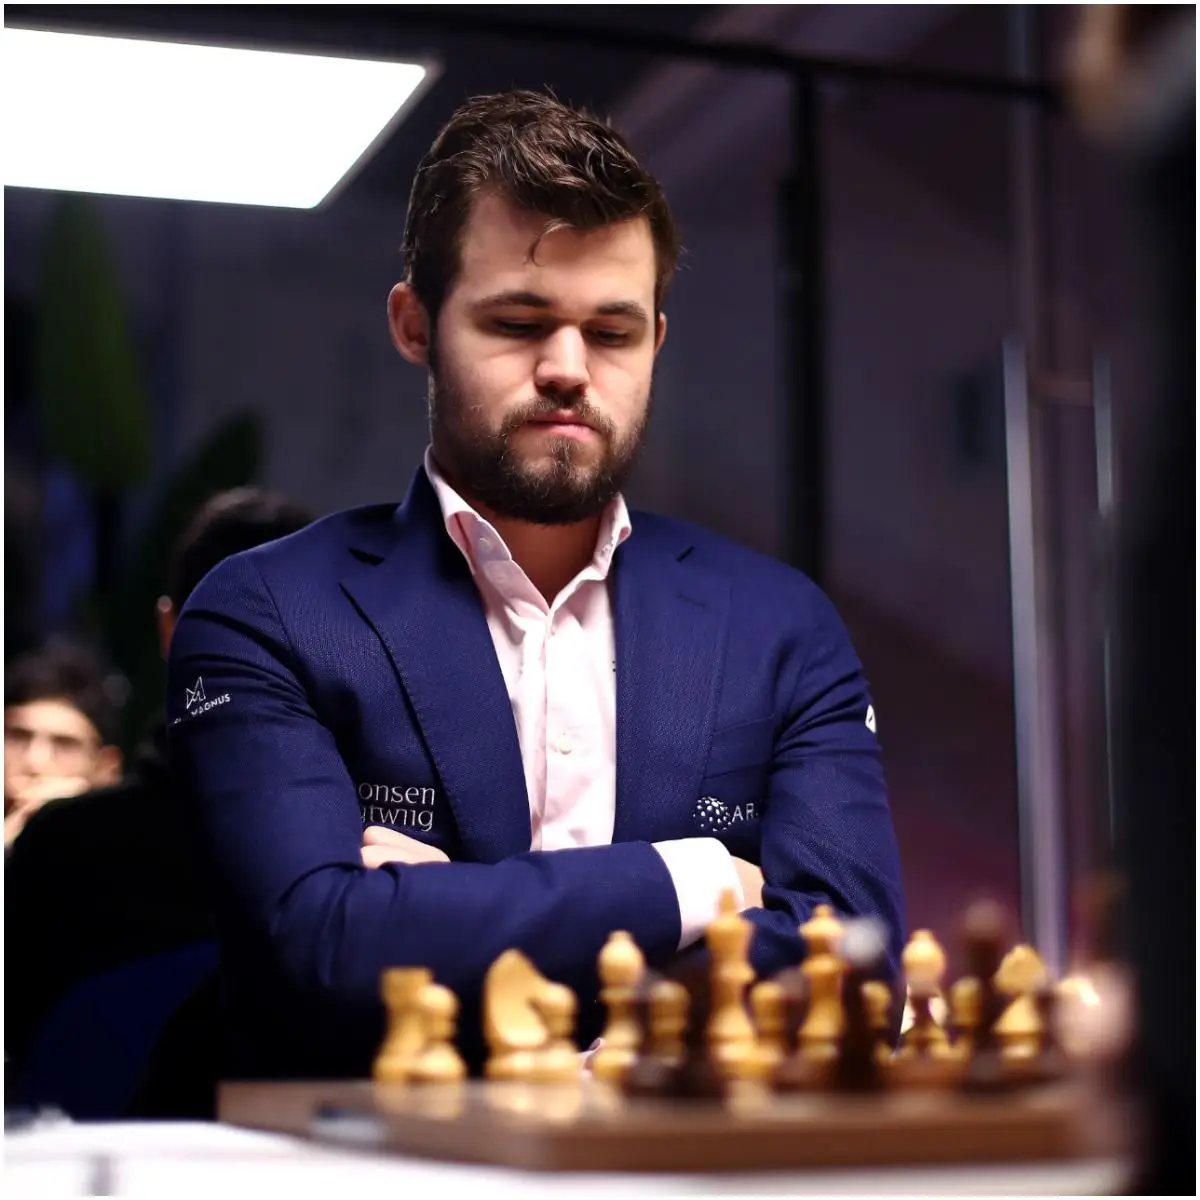 African Chess Academy - Magnus Carlsen has an IQ of 186, and